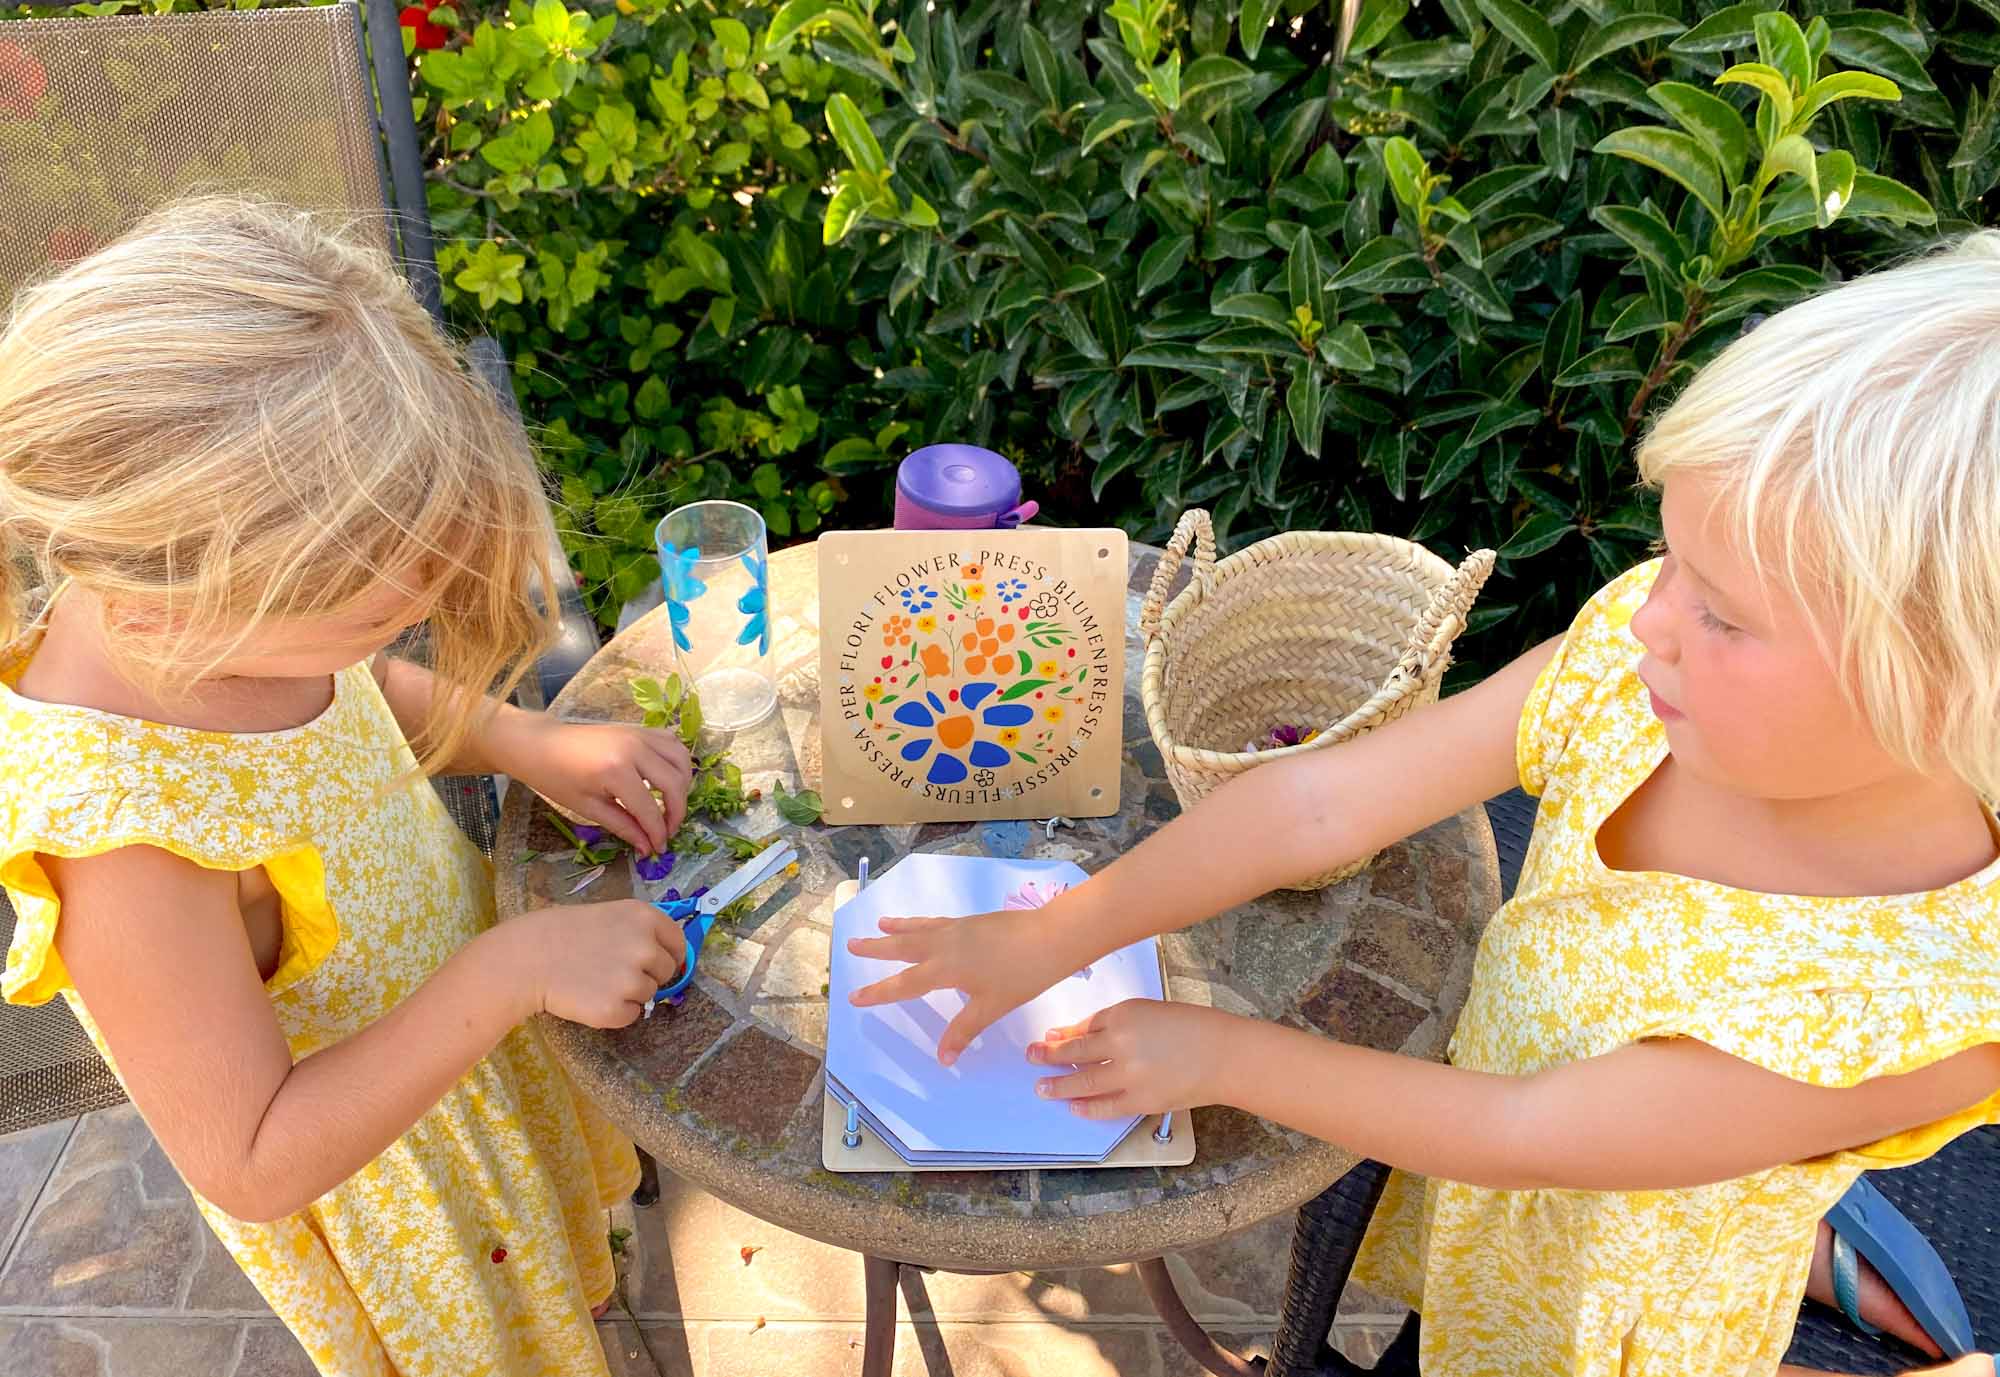 2 young girls loading freshly cut flowers into a small flower press, on an outside table